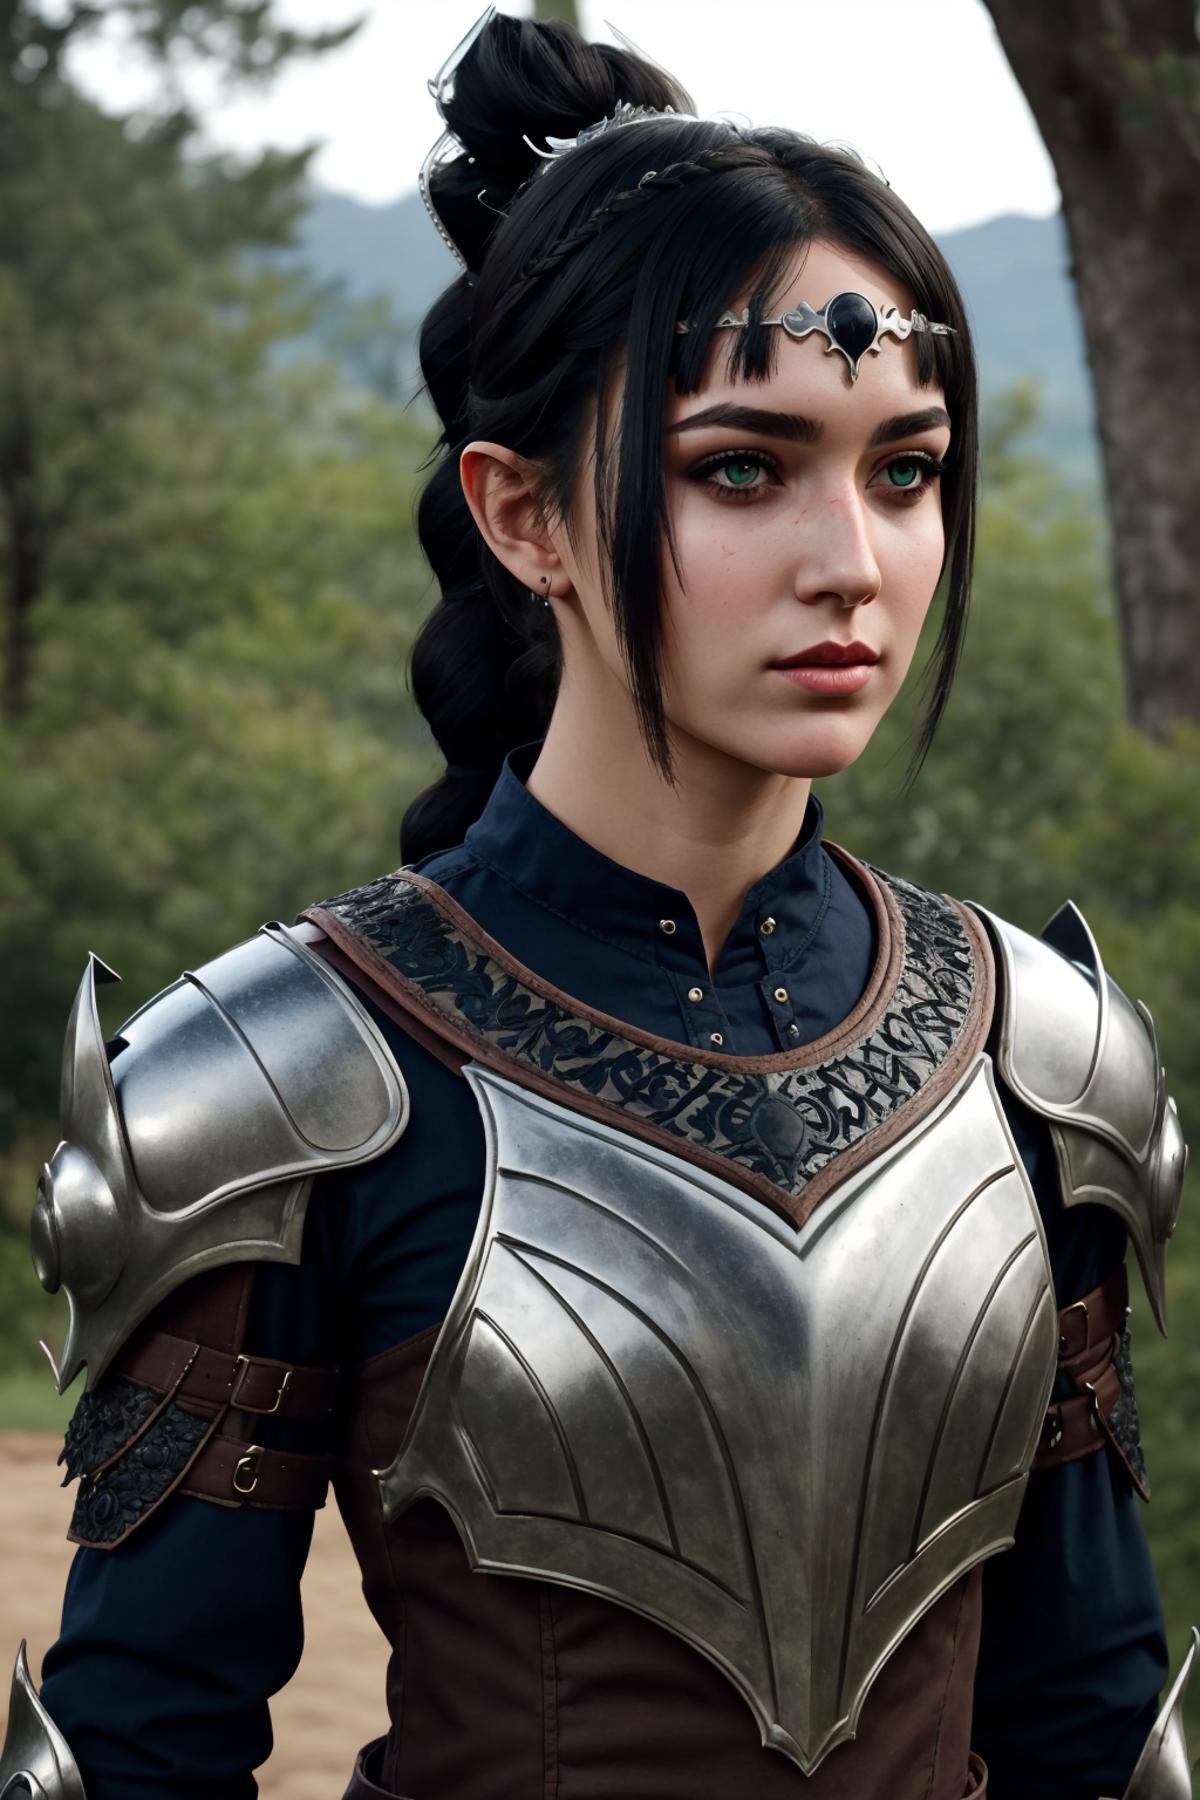 A woman wearing a chainmail armor and a blue dress, looking into the camera.